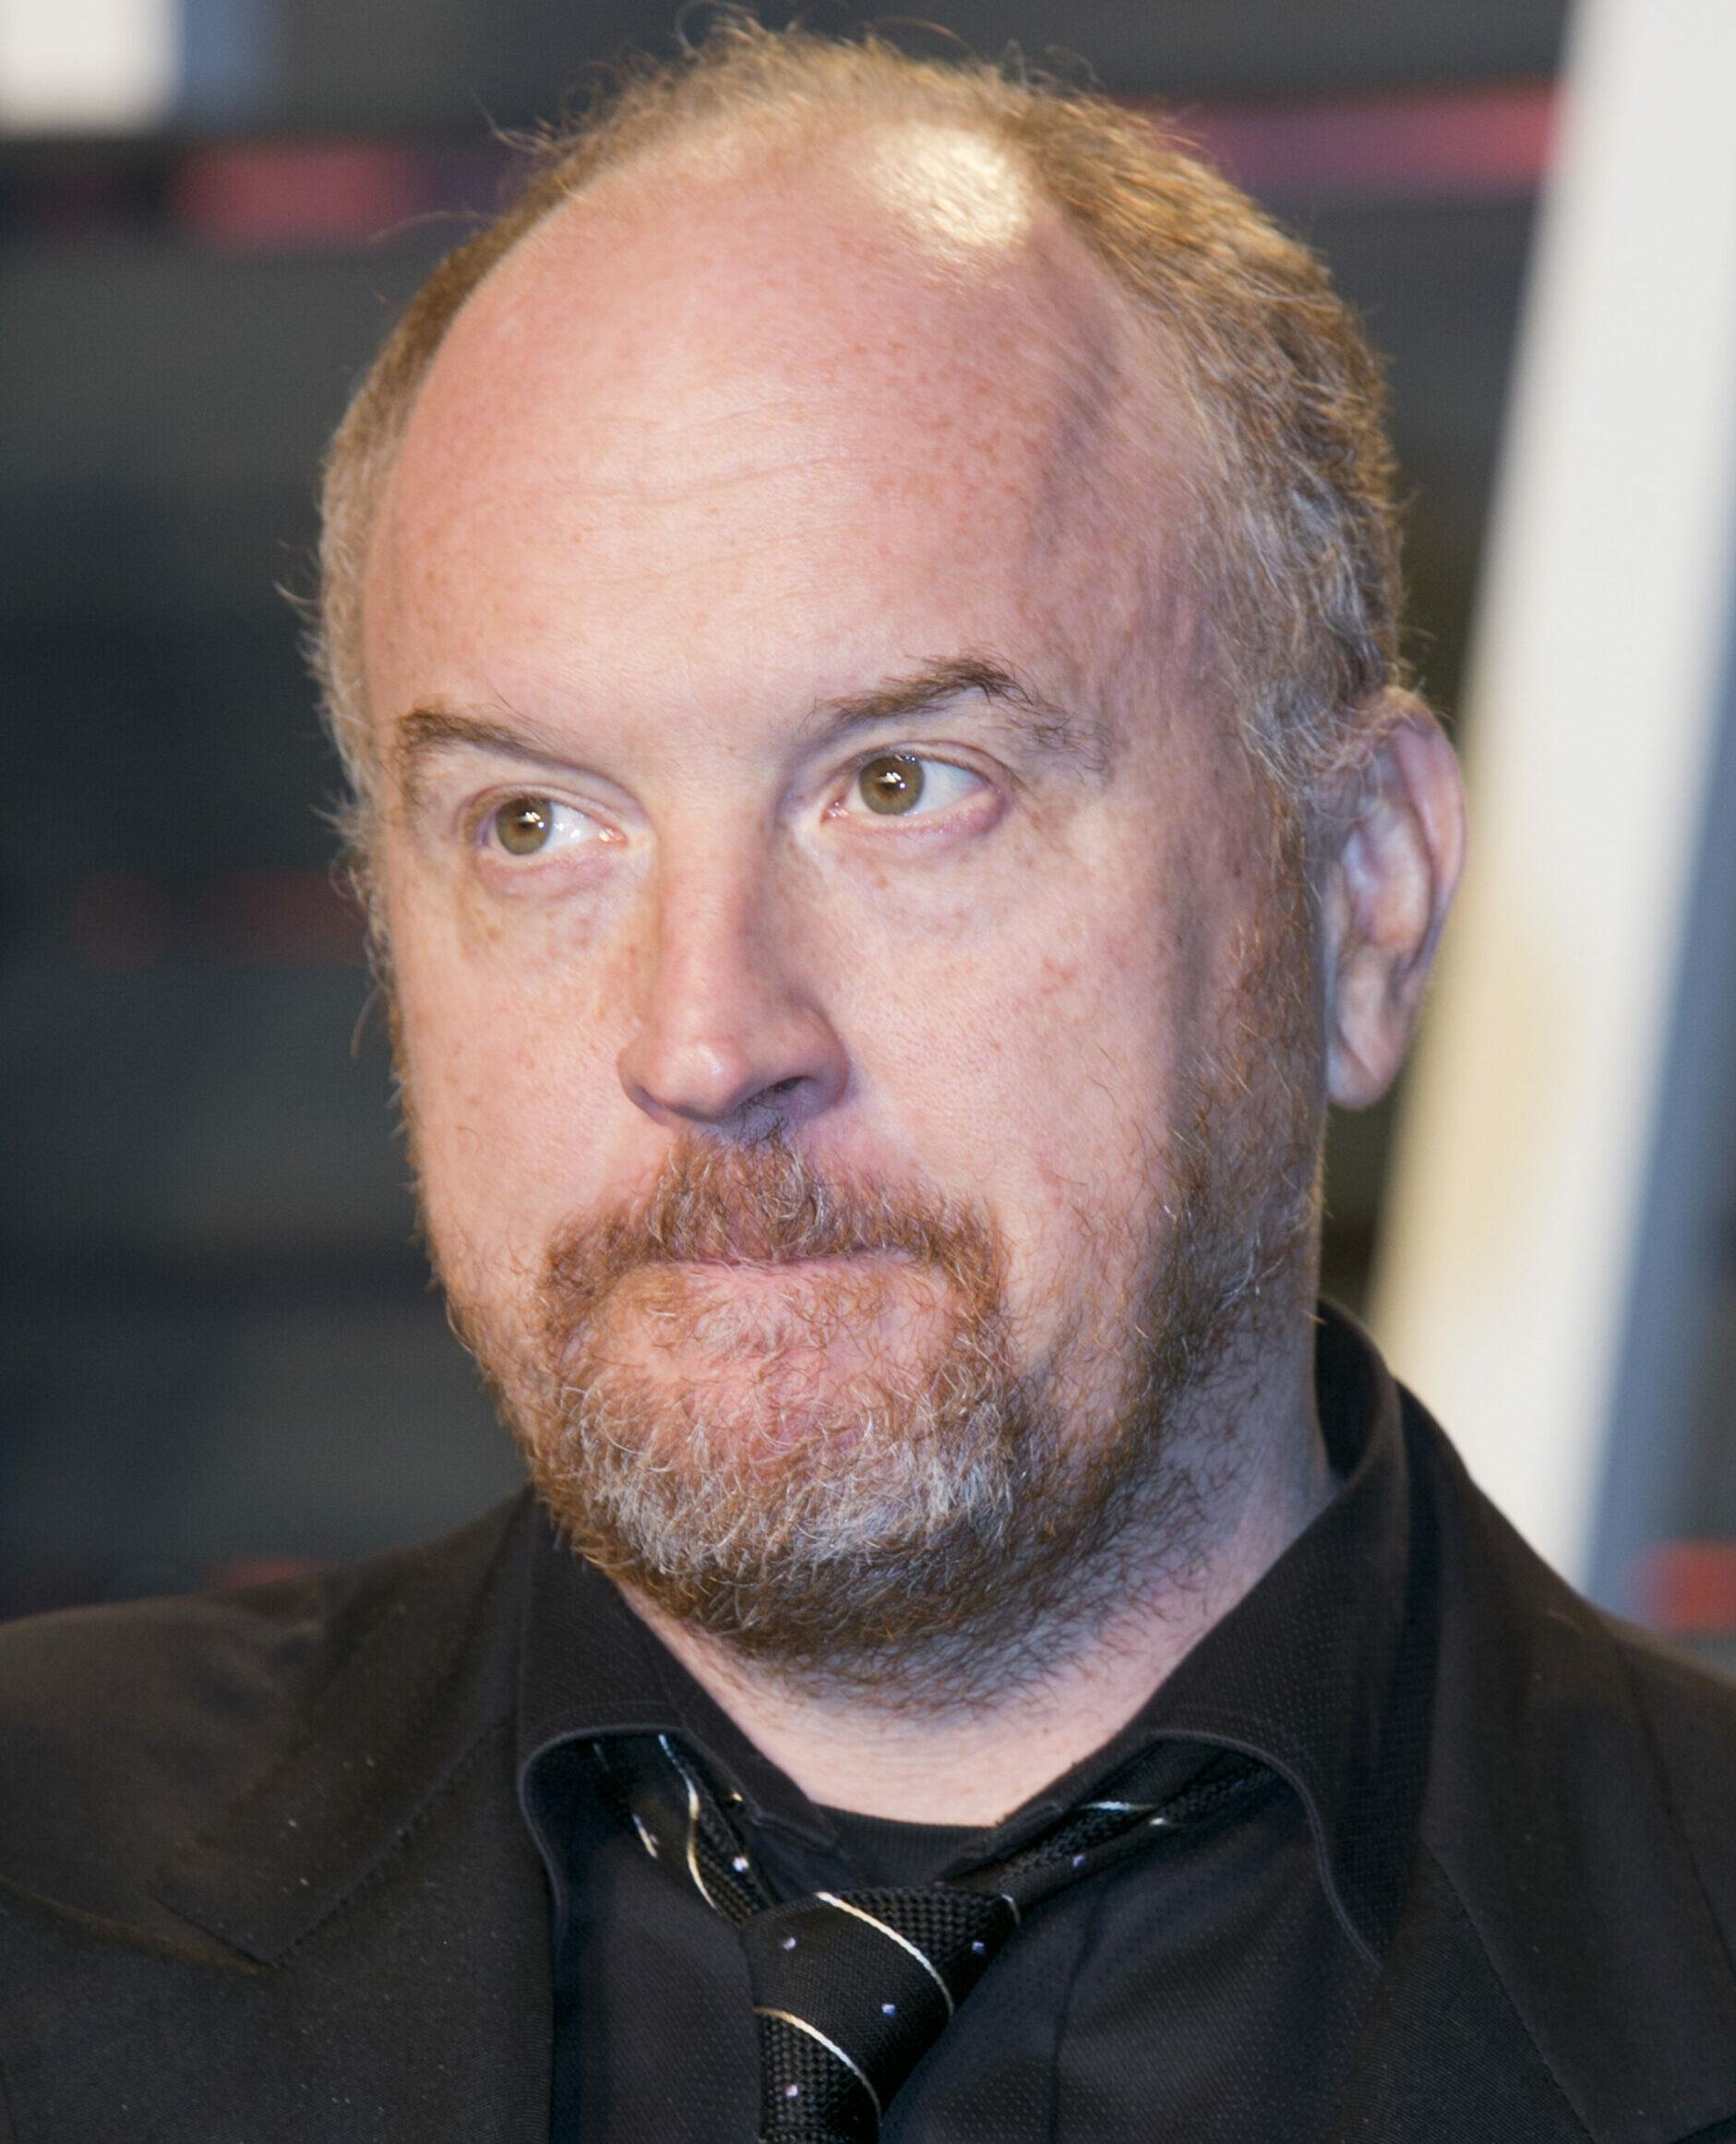 Louis C.K. Accuser Blasts Grammy Win And The 'Message This Sends